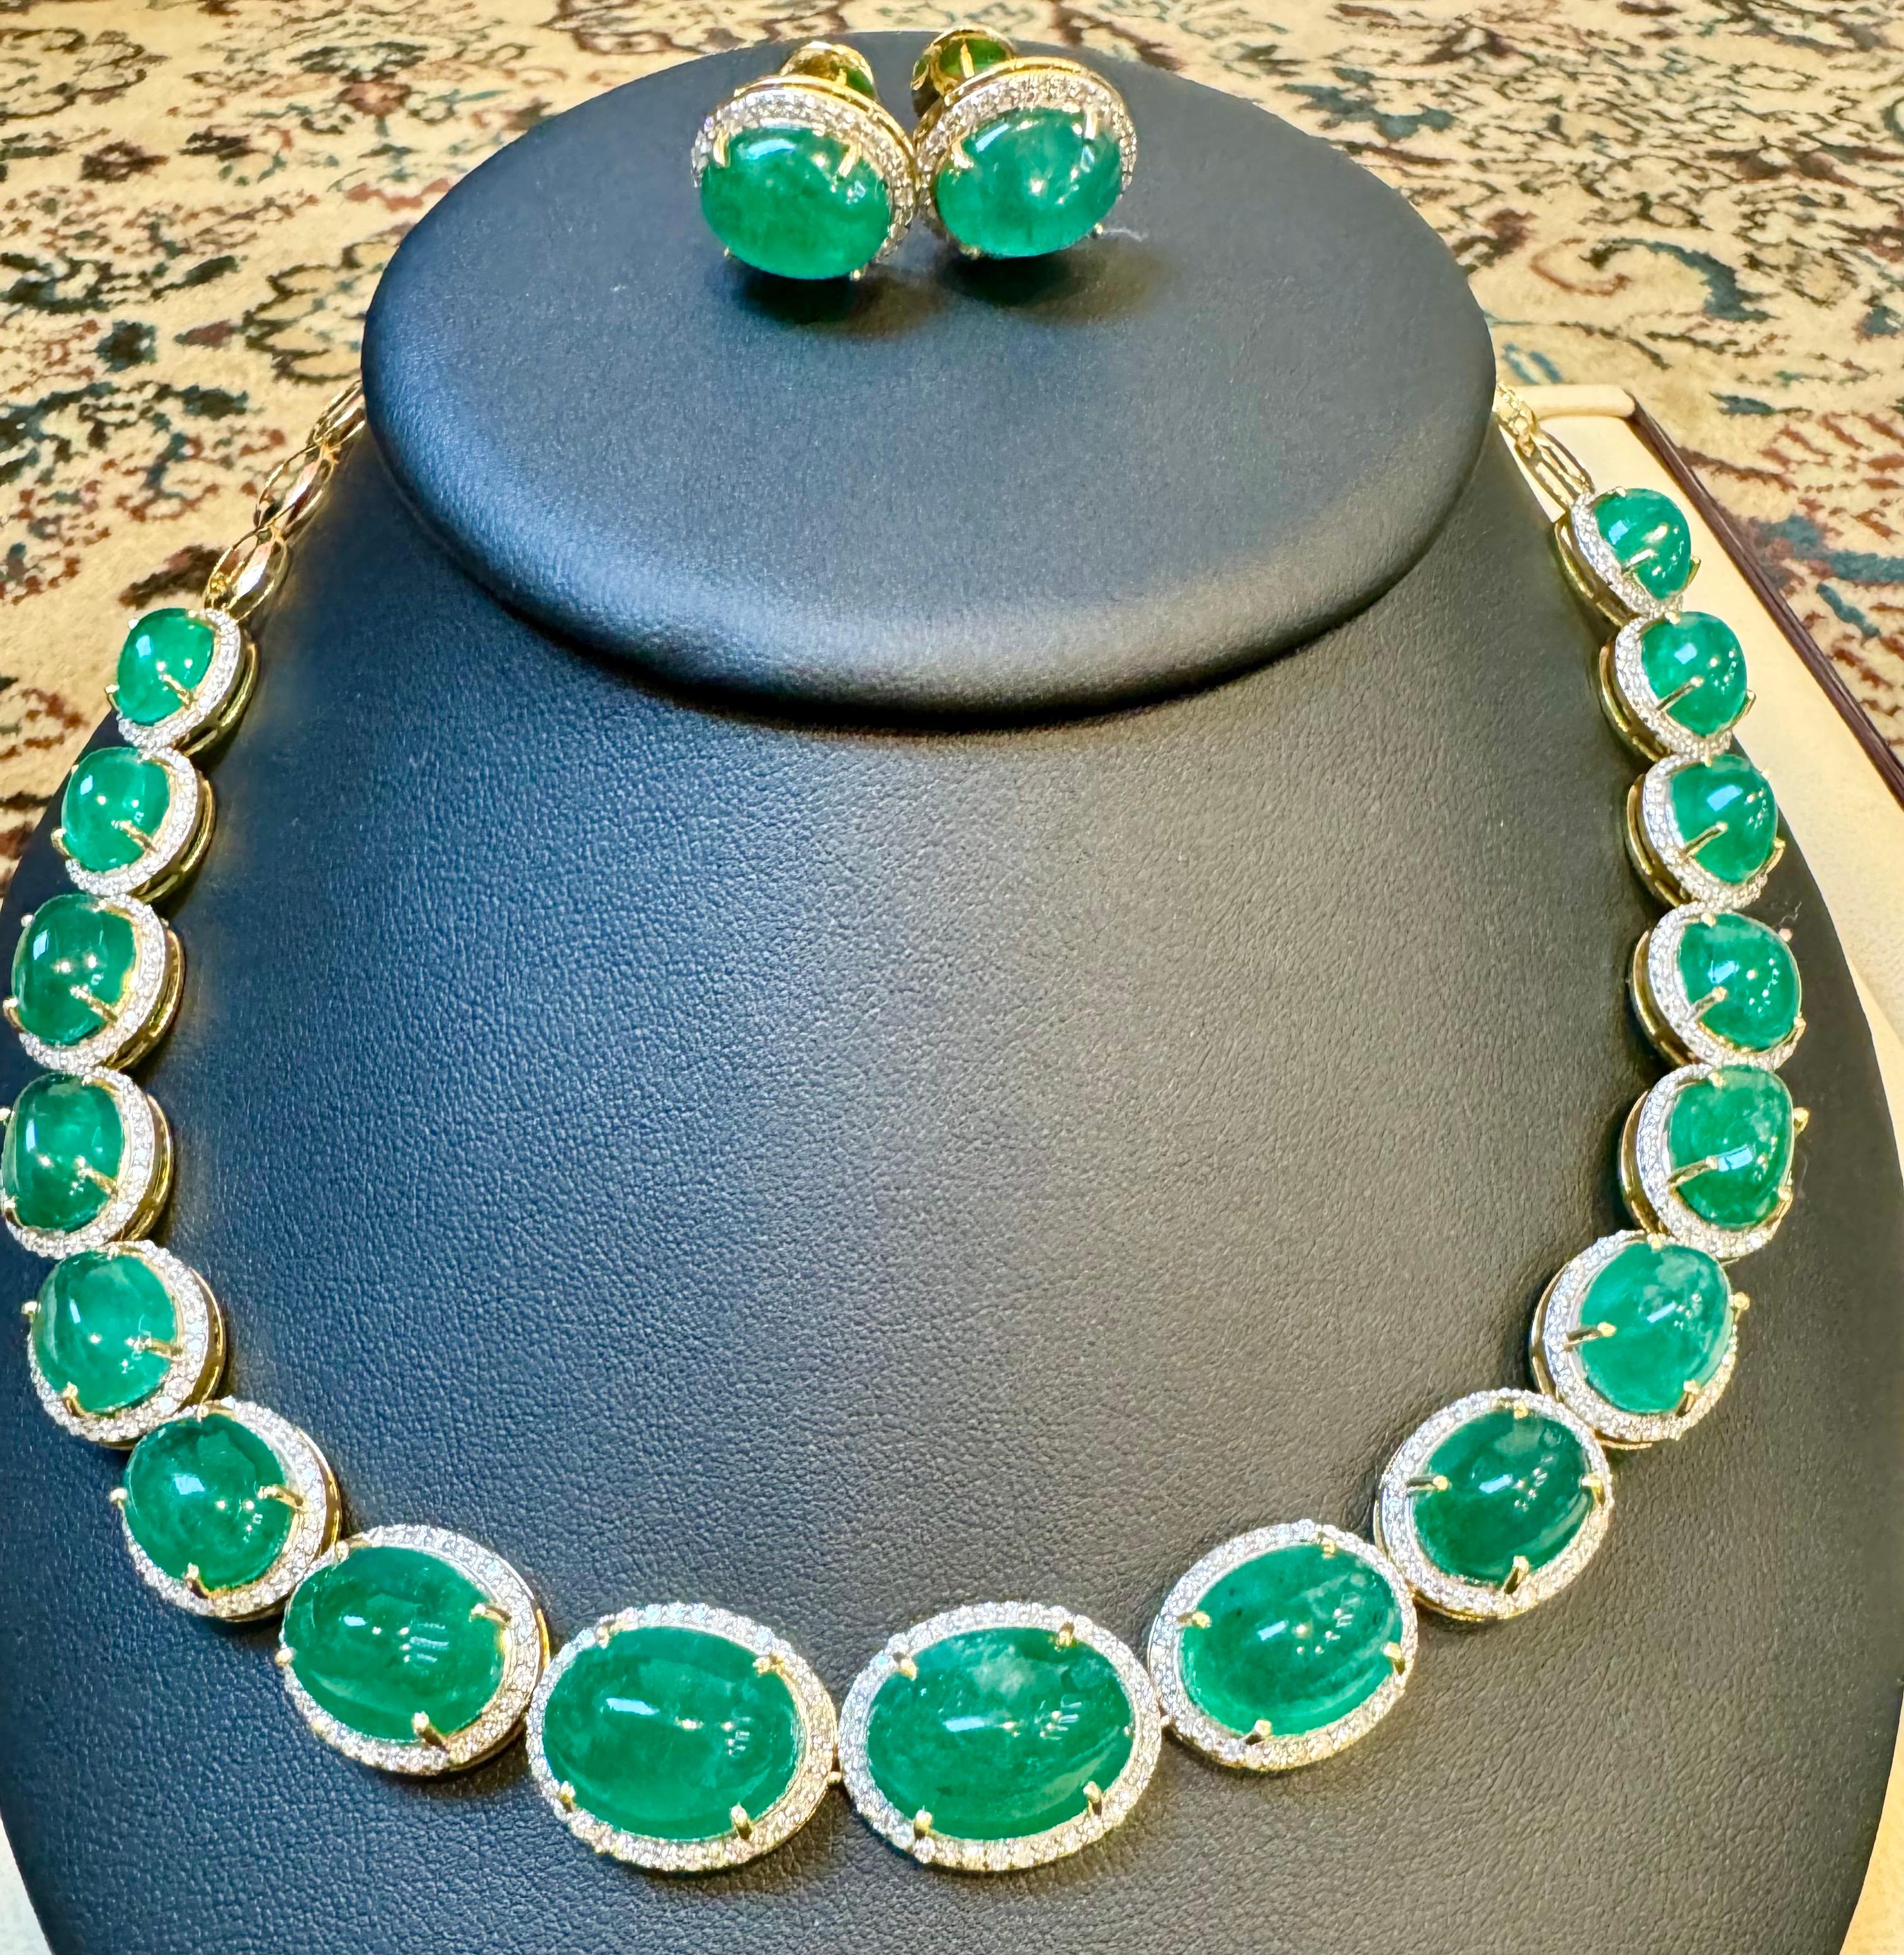 110 Ct Oval Natural Cabochon Emerald & Diamond Necklace Suite set in 14 Karat Yellow Gold is a stunning piece. This necklace showcases 17 natural cabochon emeralds, each encircled by brilliant cut diamonds. The matching stud post earrings complement